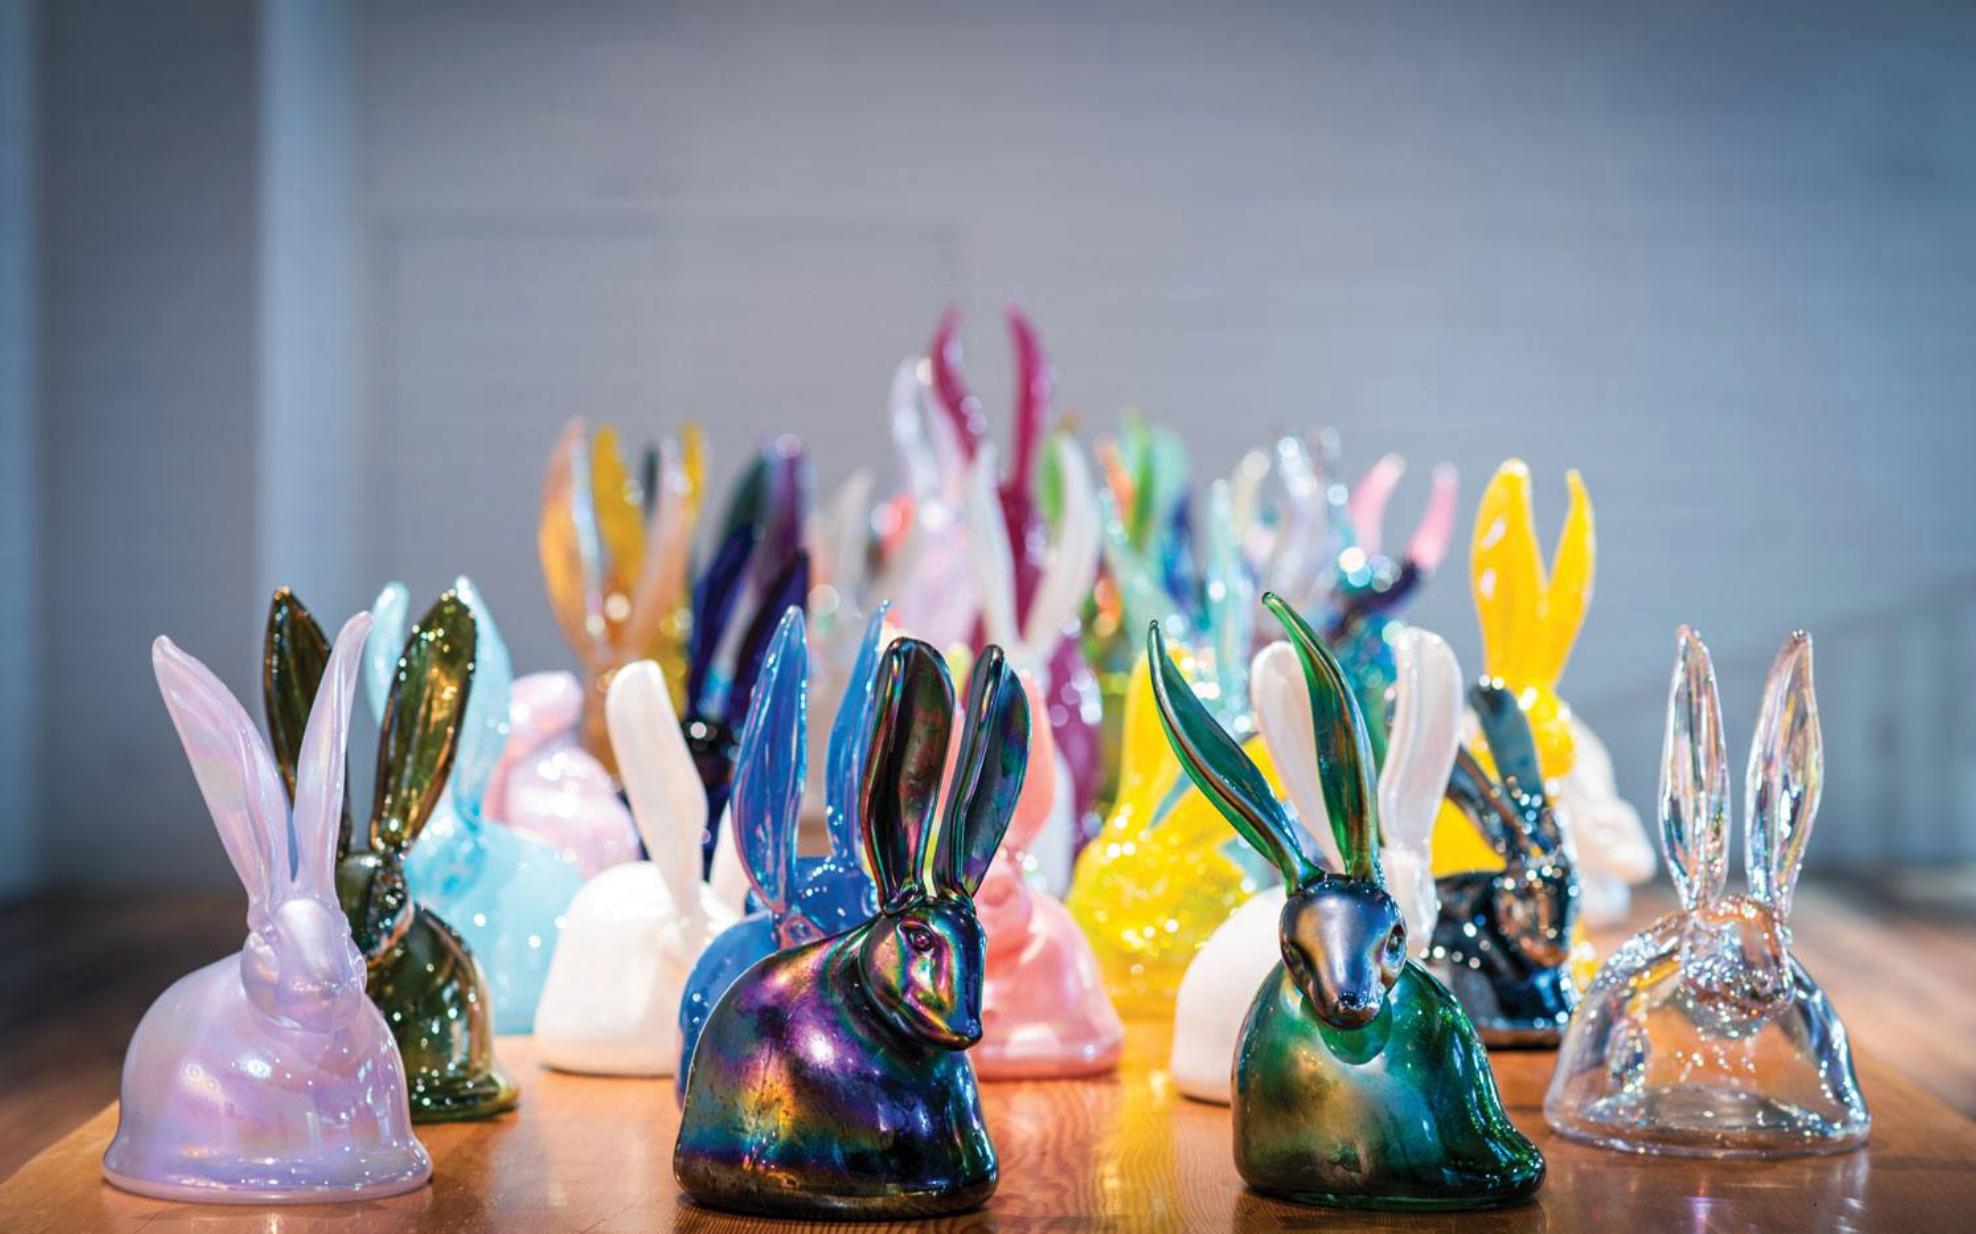 From canvas to kiln, Hunt Slonem brings his signature subject to life like never before. This wonderful hand-blown sculpture depicts one of Slonem's signature bunnies in an iridescent teal glass. Slonem’s new blown-glass sculptures are a sublime